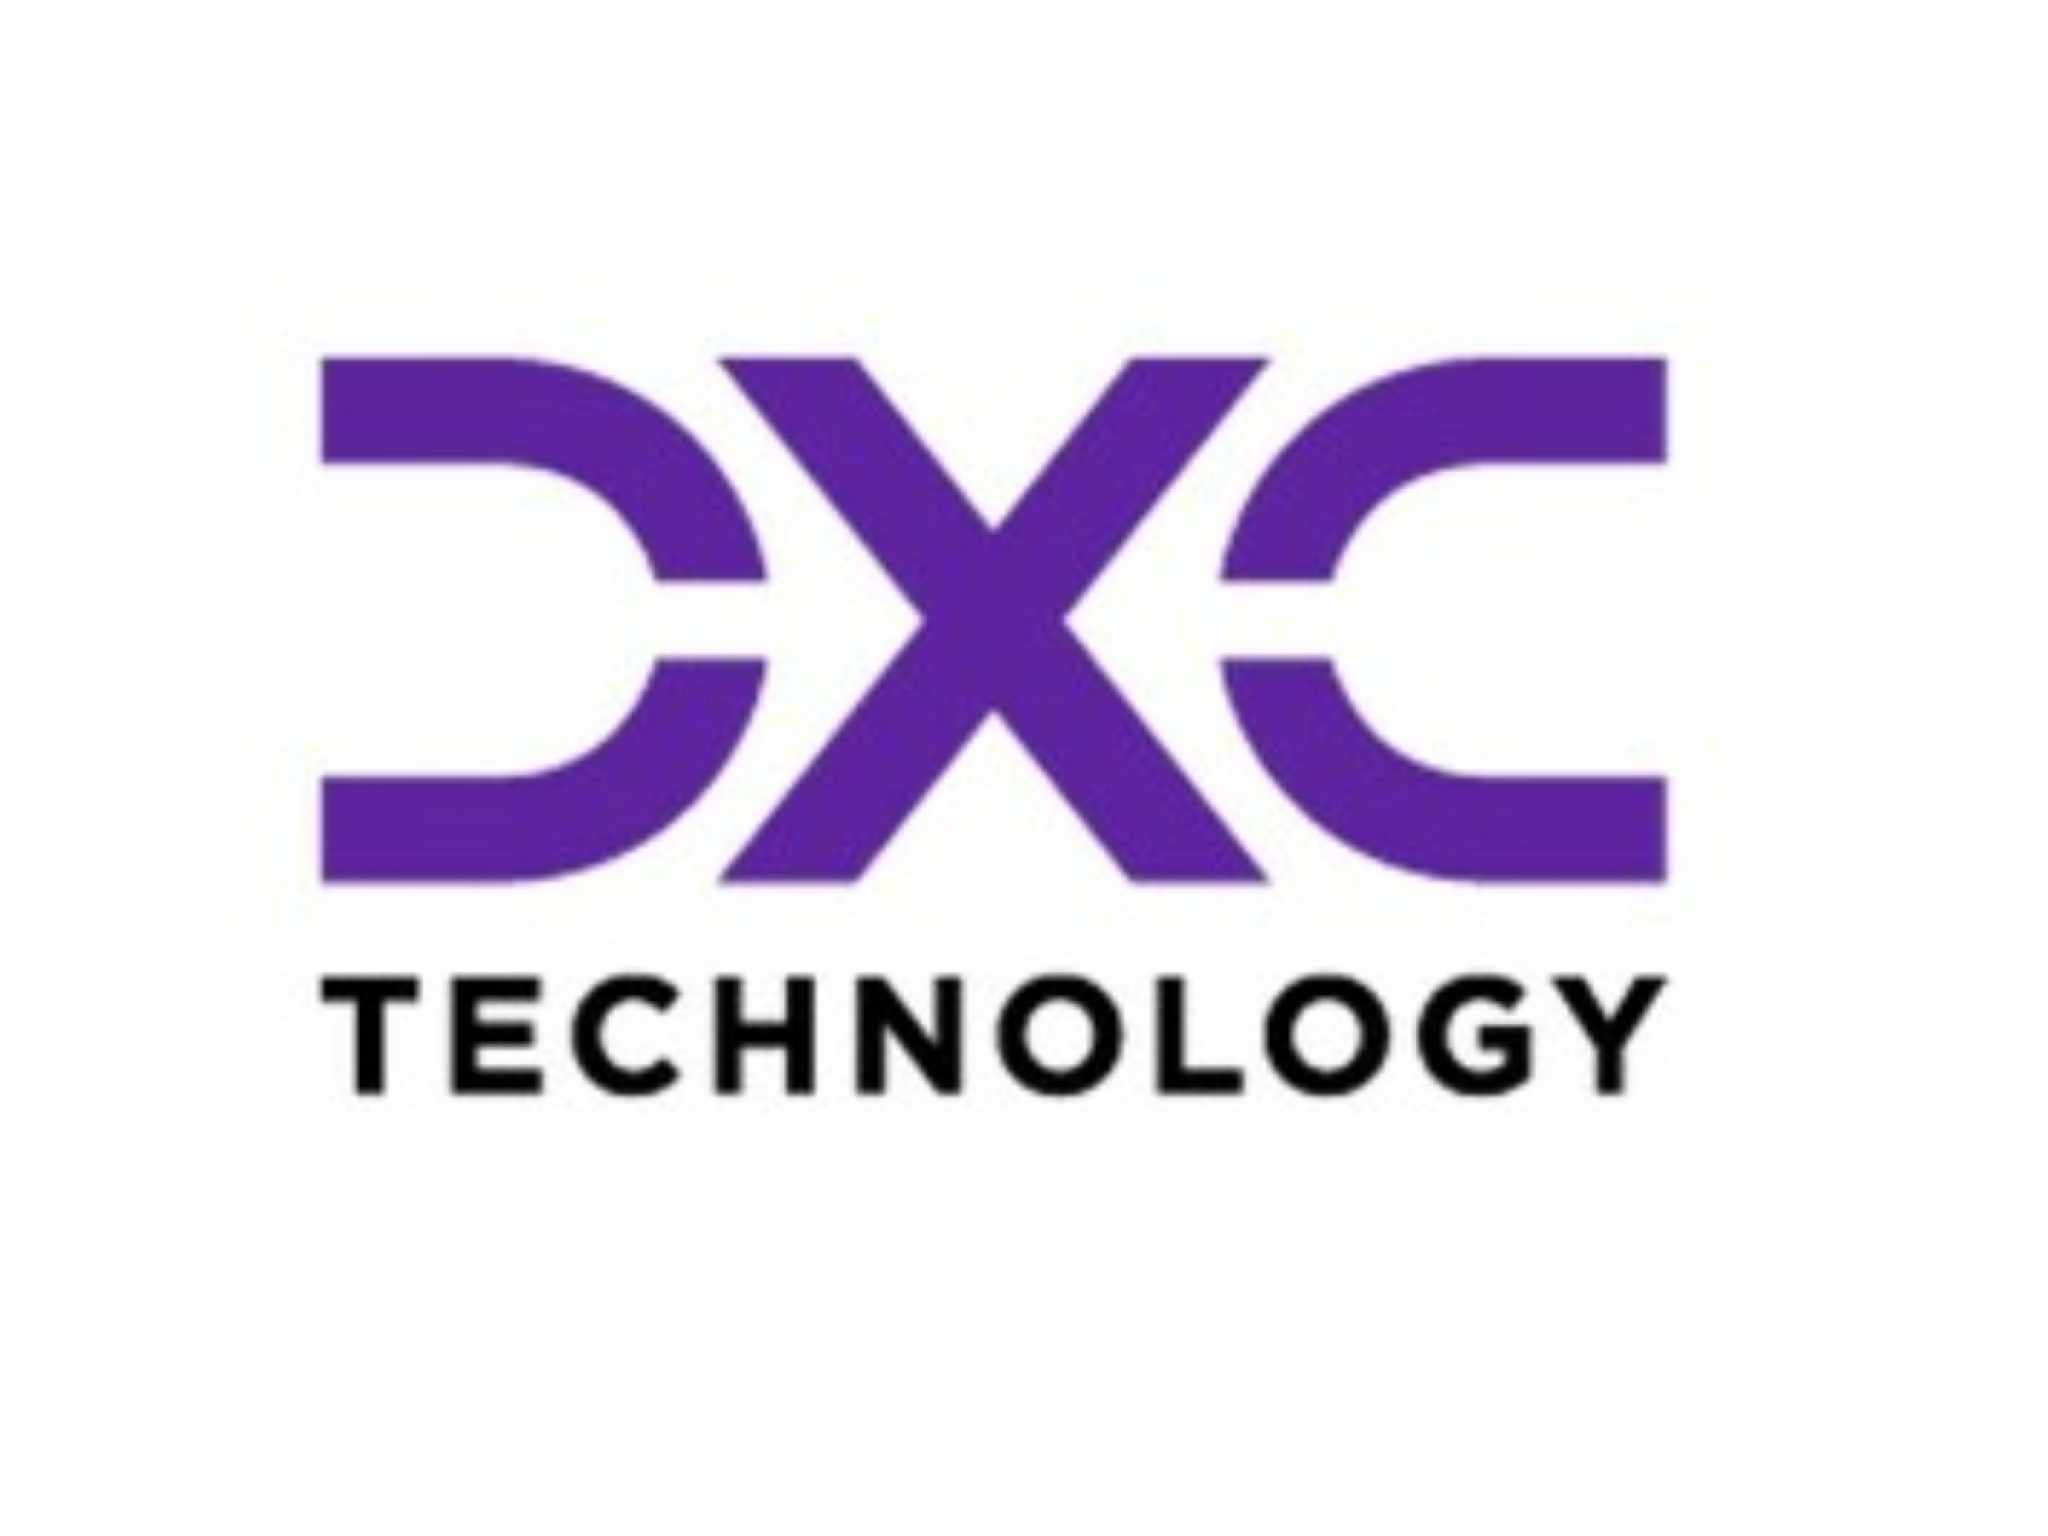  why-it-company-dxc-technology-shares-are-down-today 